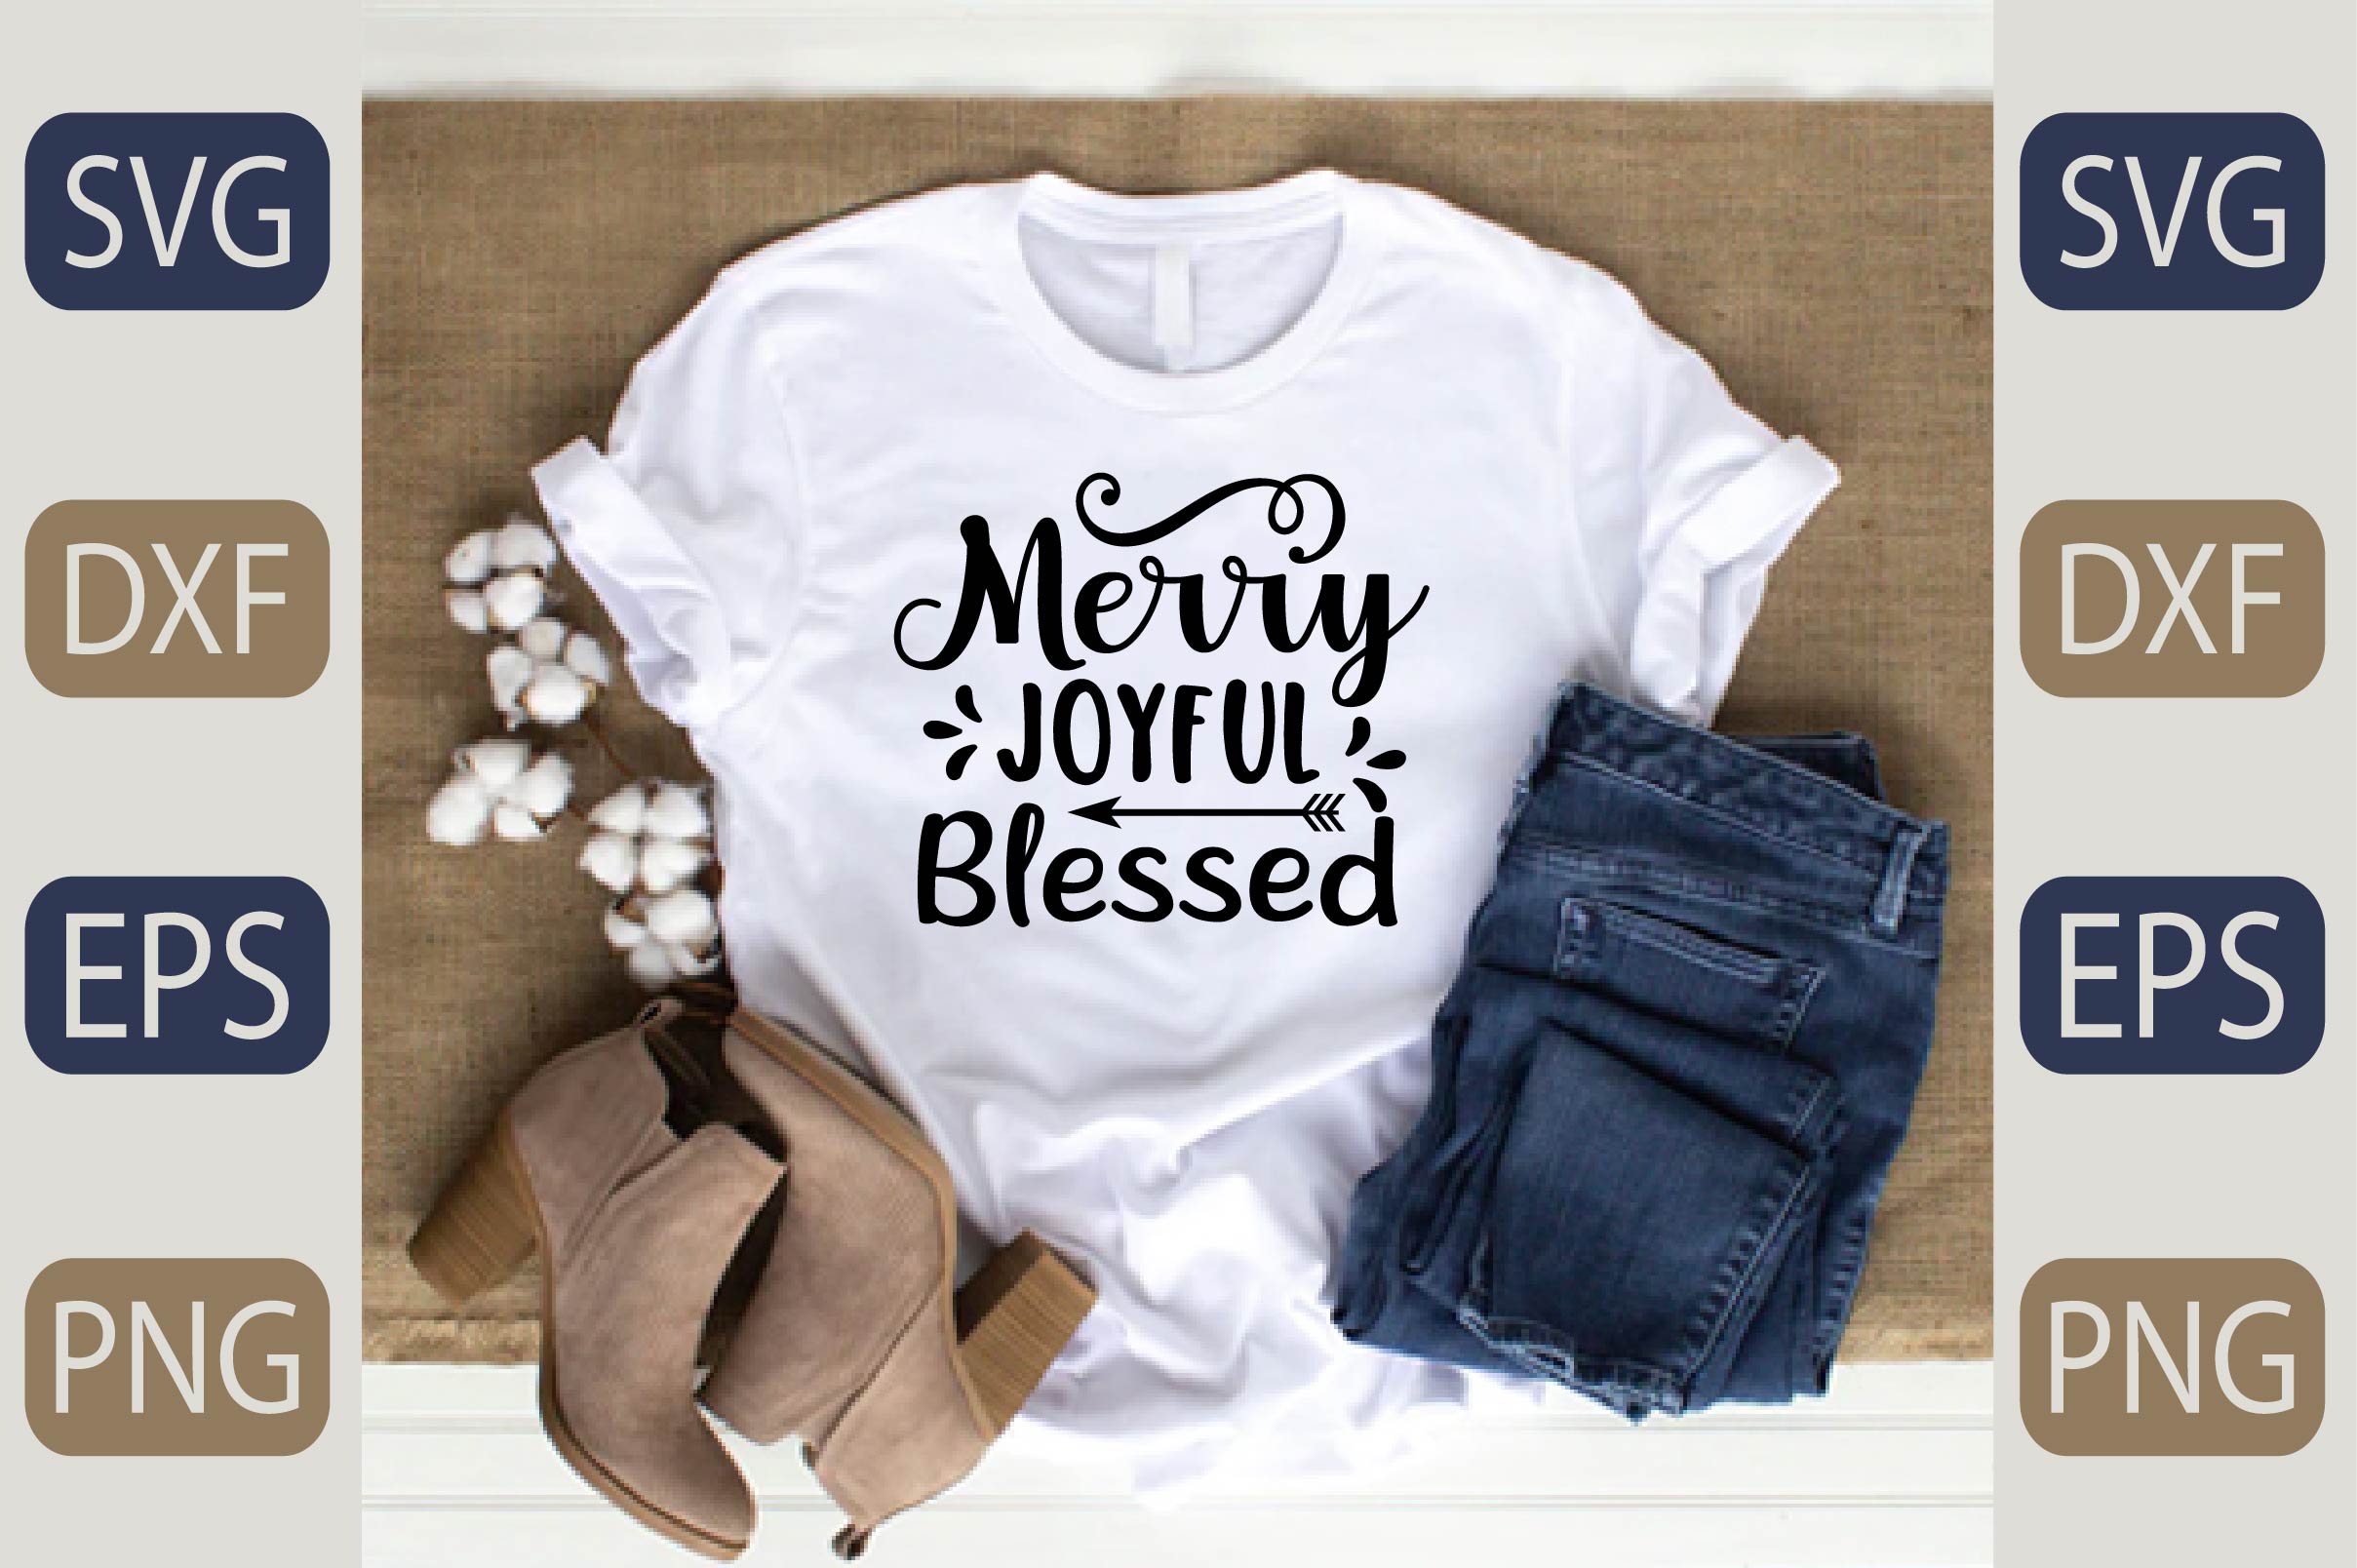 T - shirt that says merry joy and a pair of jeans.